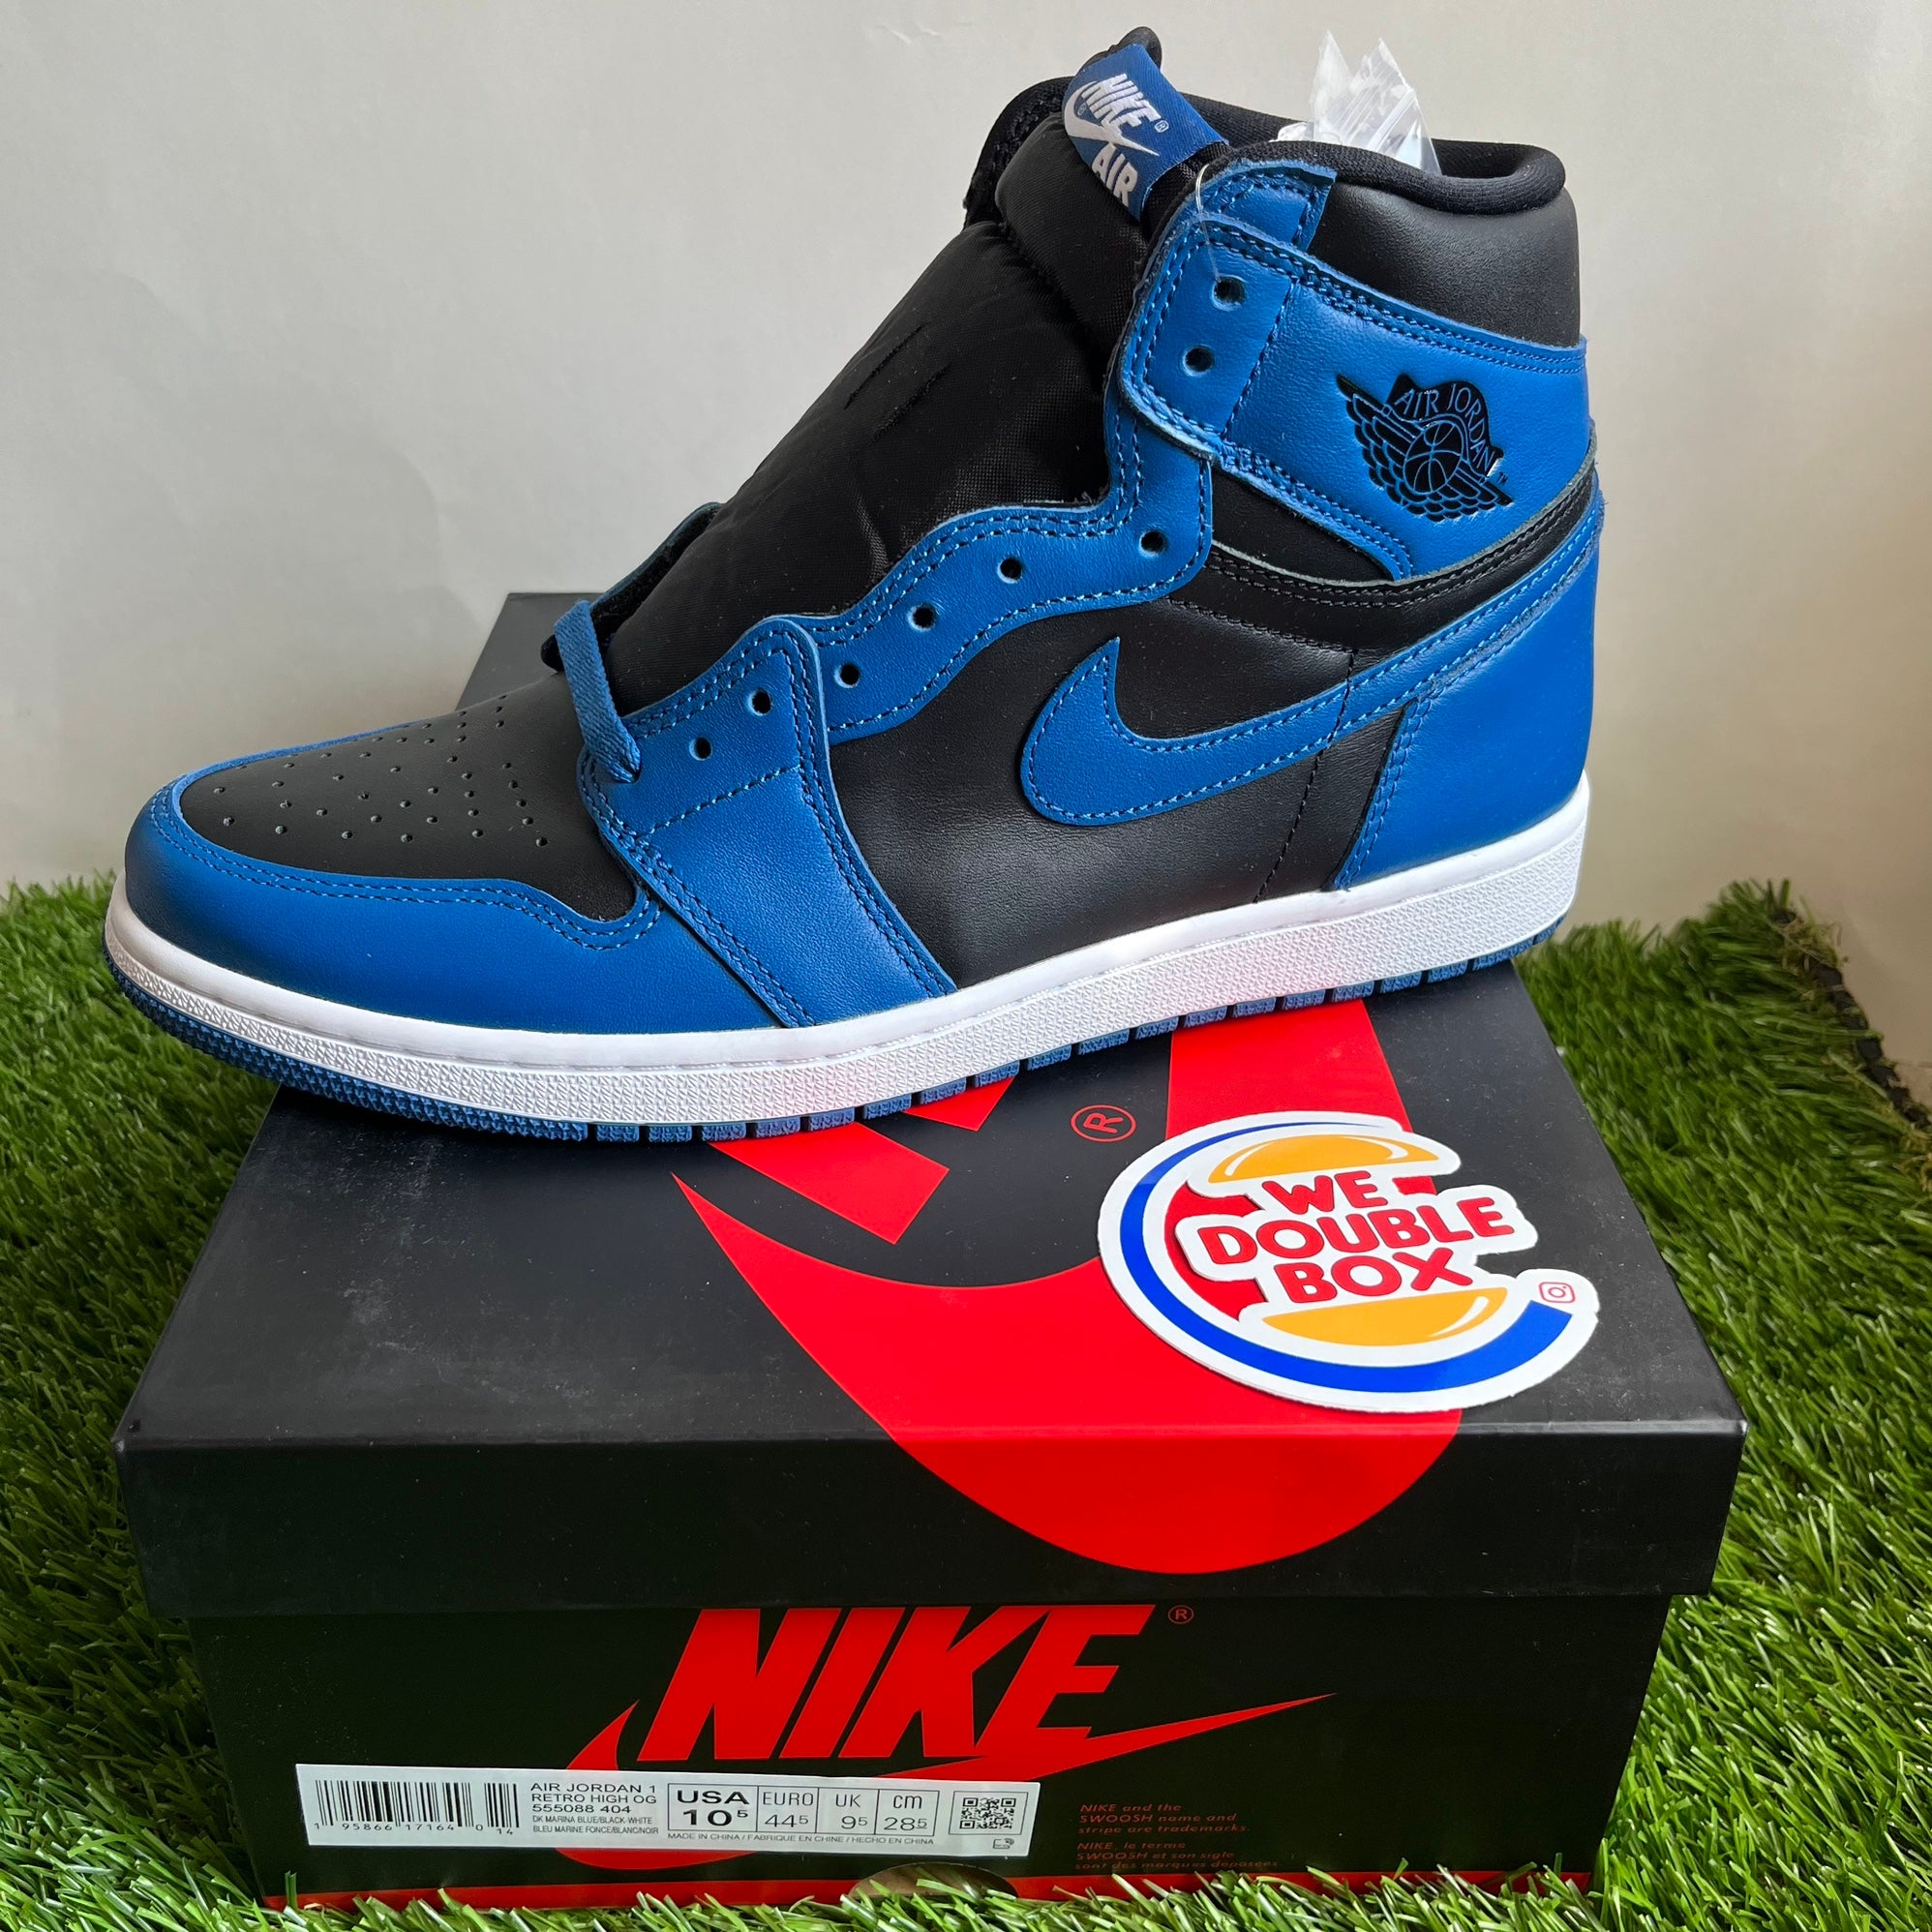 Nike Air Jordan 1 Marina Blue Size 10.5 Shoes Sneakers Jumpman 23 New Adult Ds Deadstock Laces | SidelineSwap